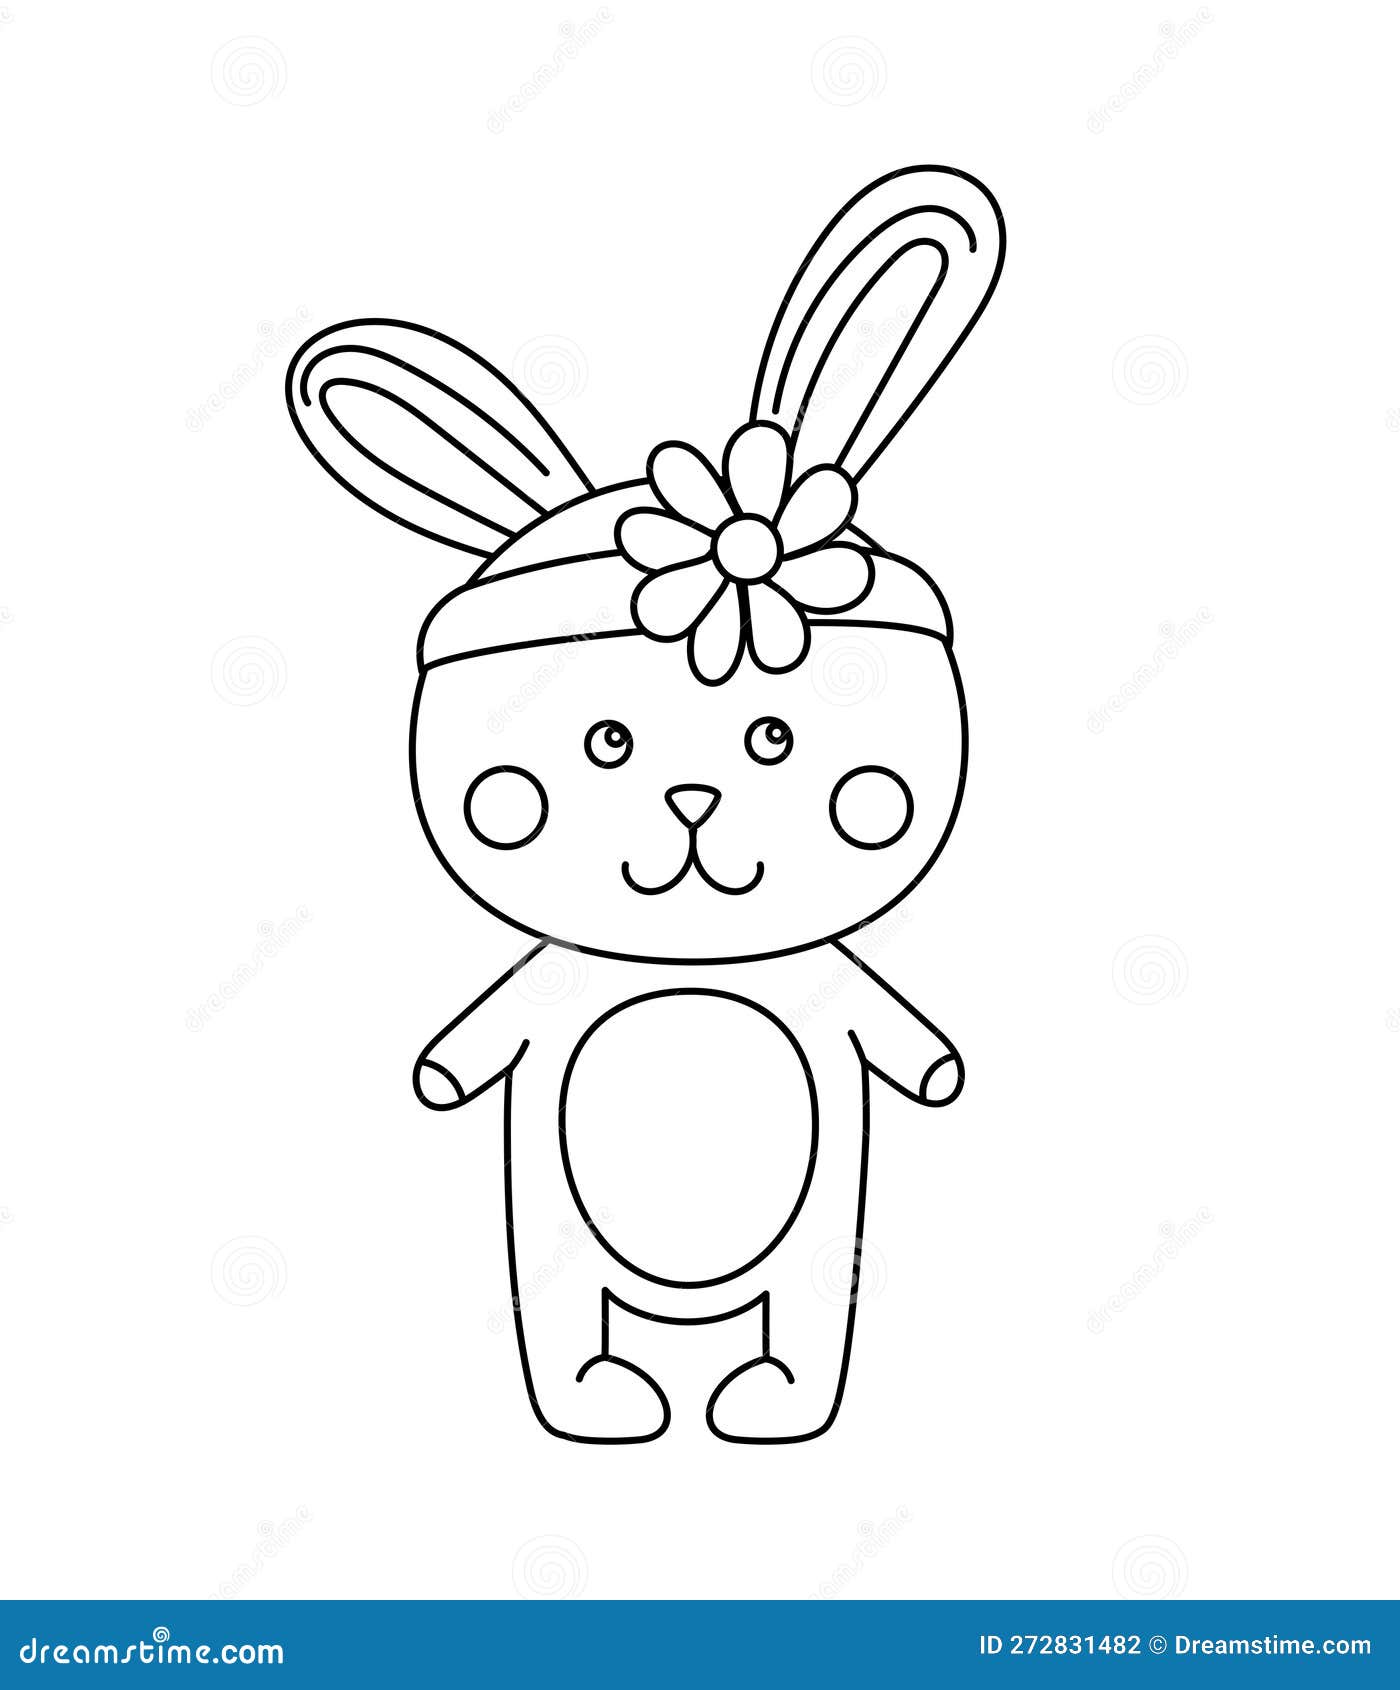 Bunny Doodle Coloring Book with Vector Illustration for Kids Stock ...